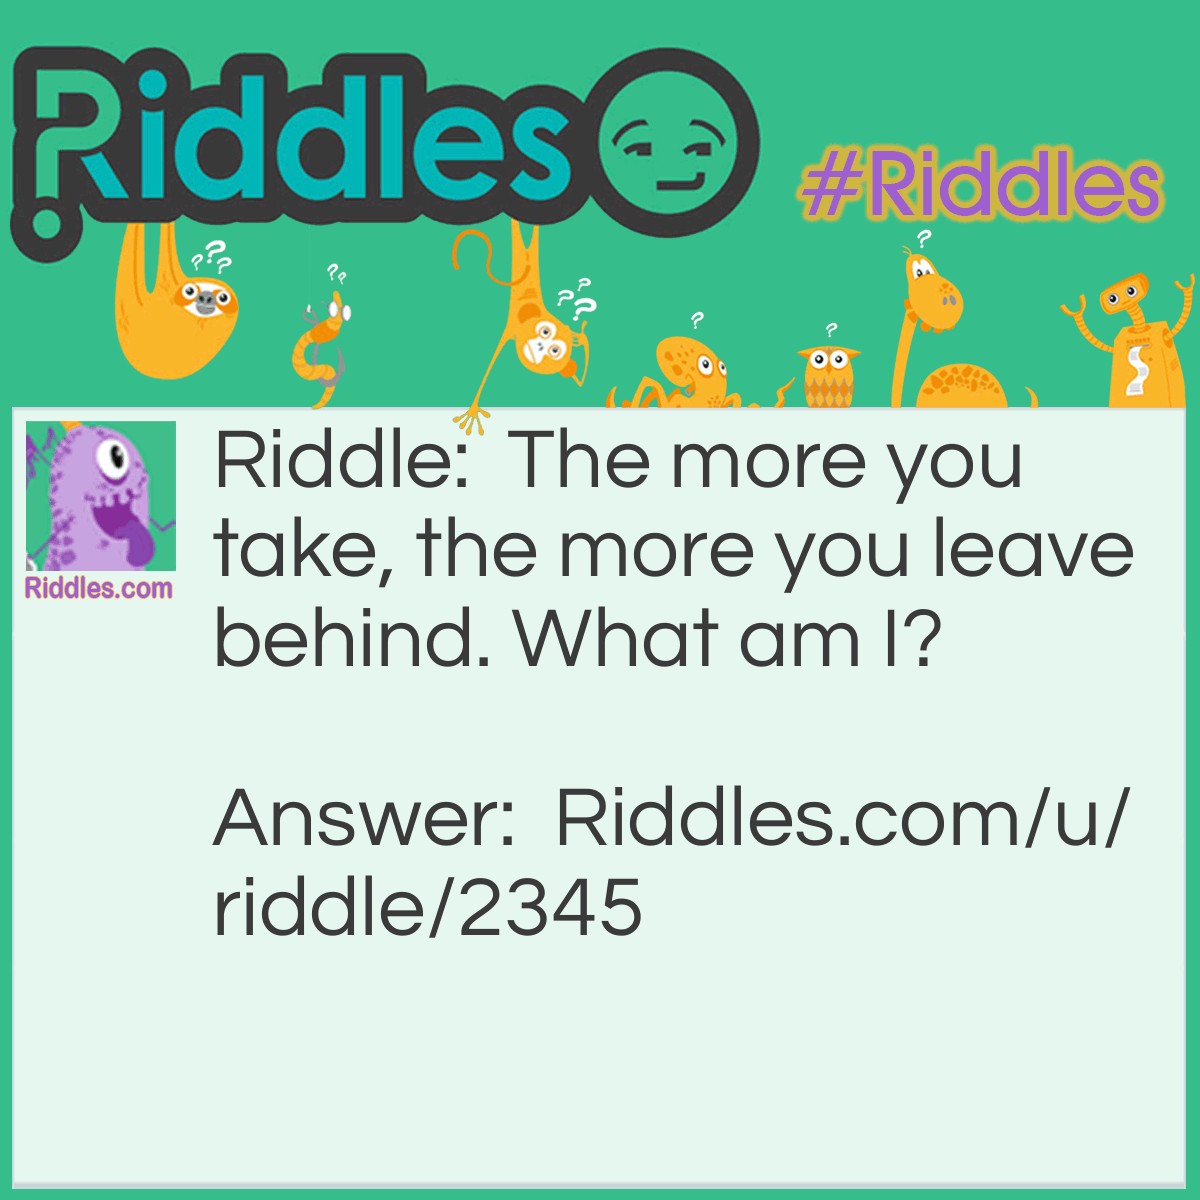 Riddle: The more you take, the more you leave behind. "<a href="/what-am-i">What am I?</a>" Answer: You take footsteps and leave footprints.